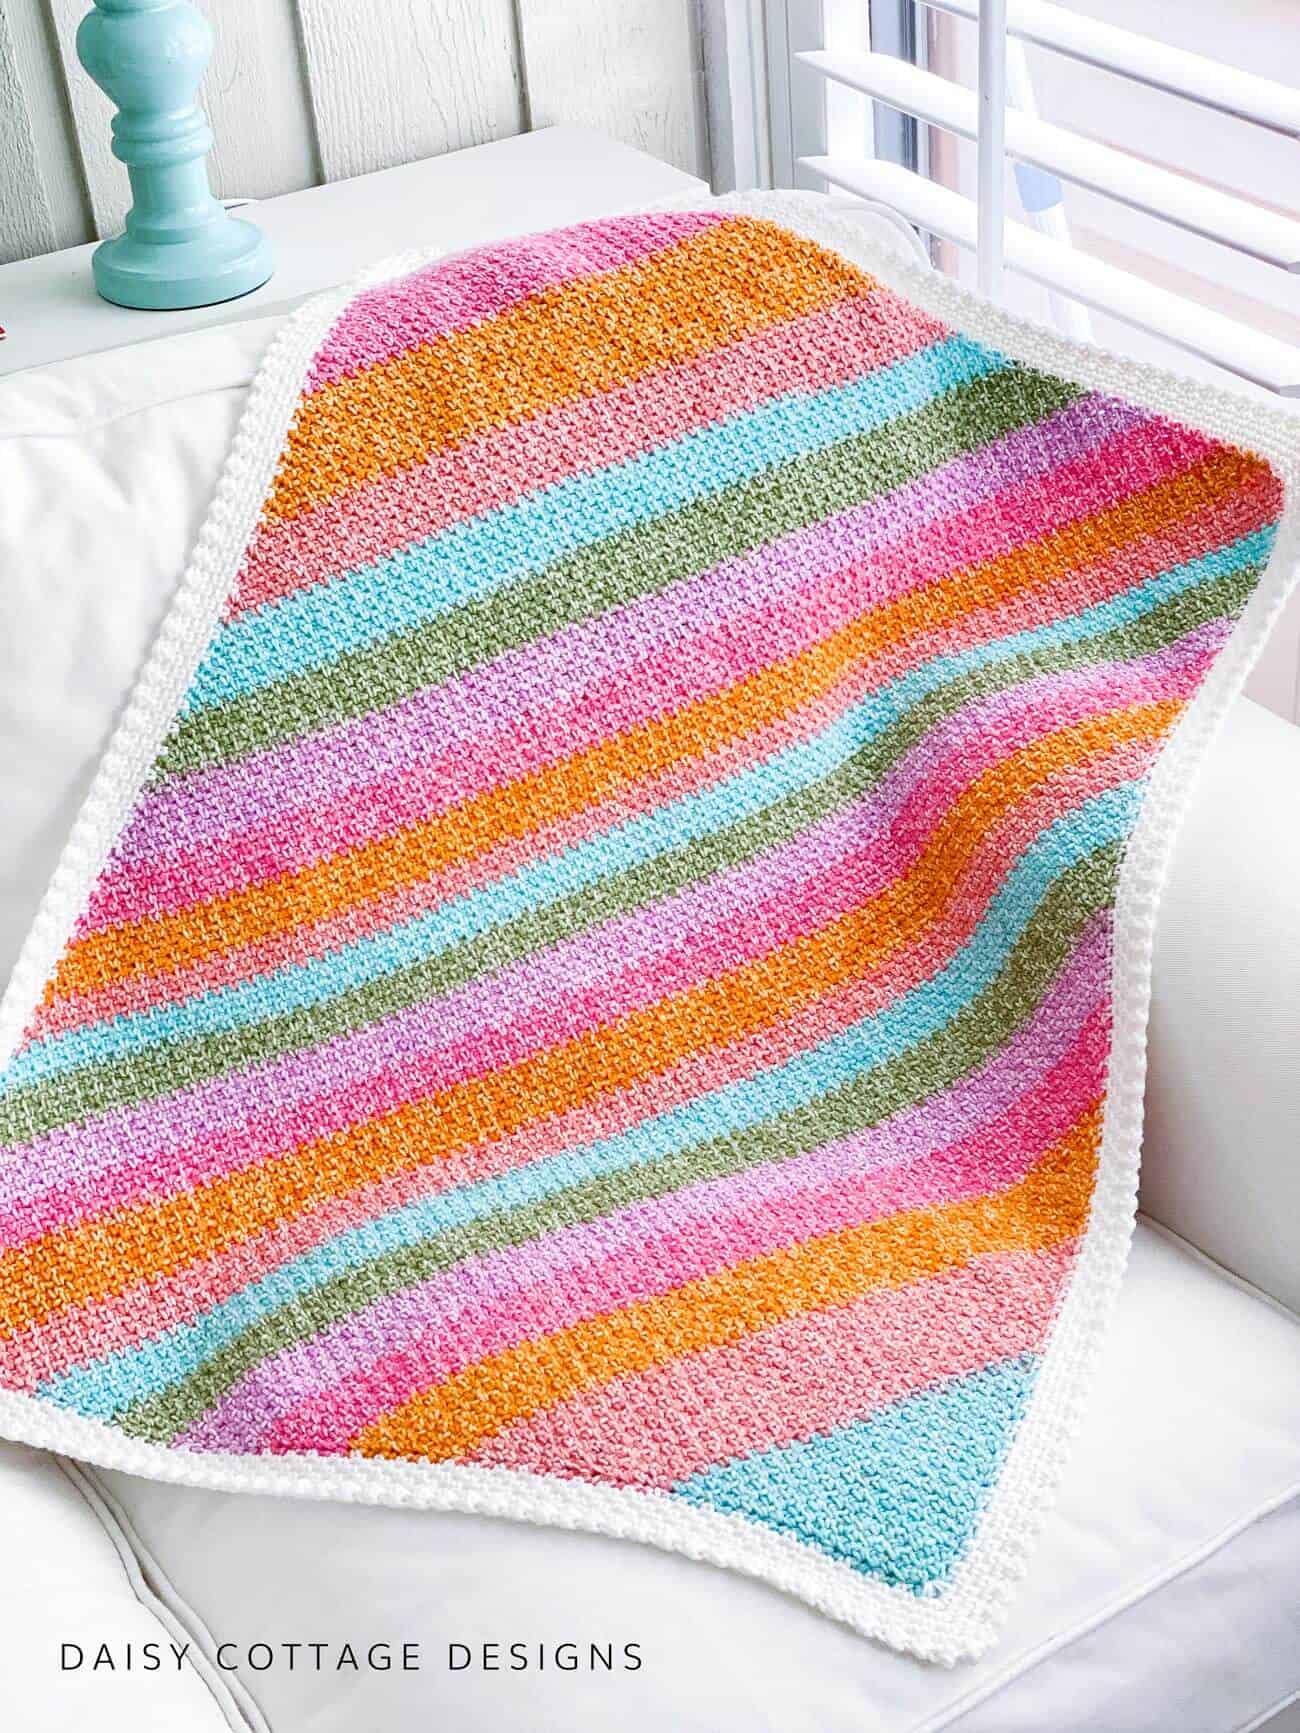 Use this moss stitch crochet pattern to create gorgeous crochet blankets for your next project. Quick and easy to make, this pattern is a great addition to your collection of free crochet patterns.